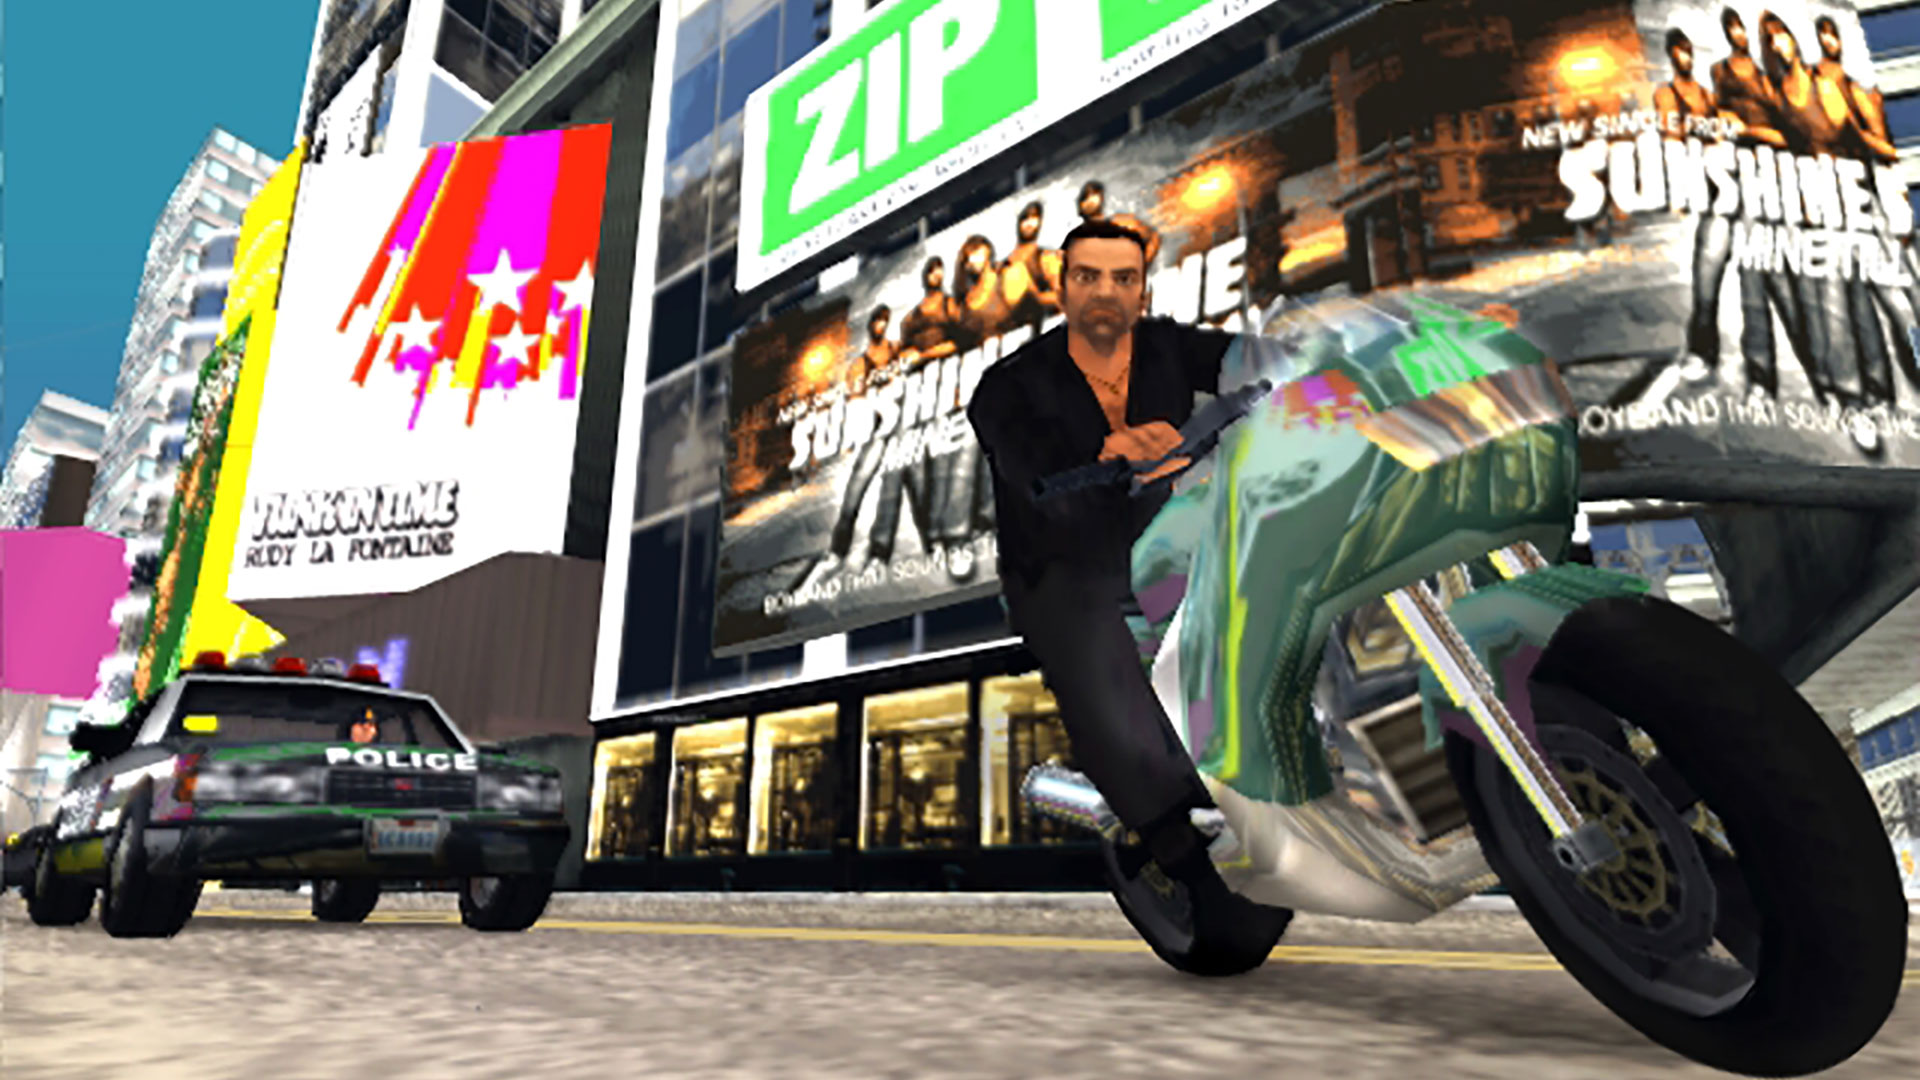 Grand Theft Auto: Liberty City Stories Cheats & Cheat Codes for PS2, PSP,  and Mobile - Cheat Code Central